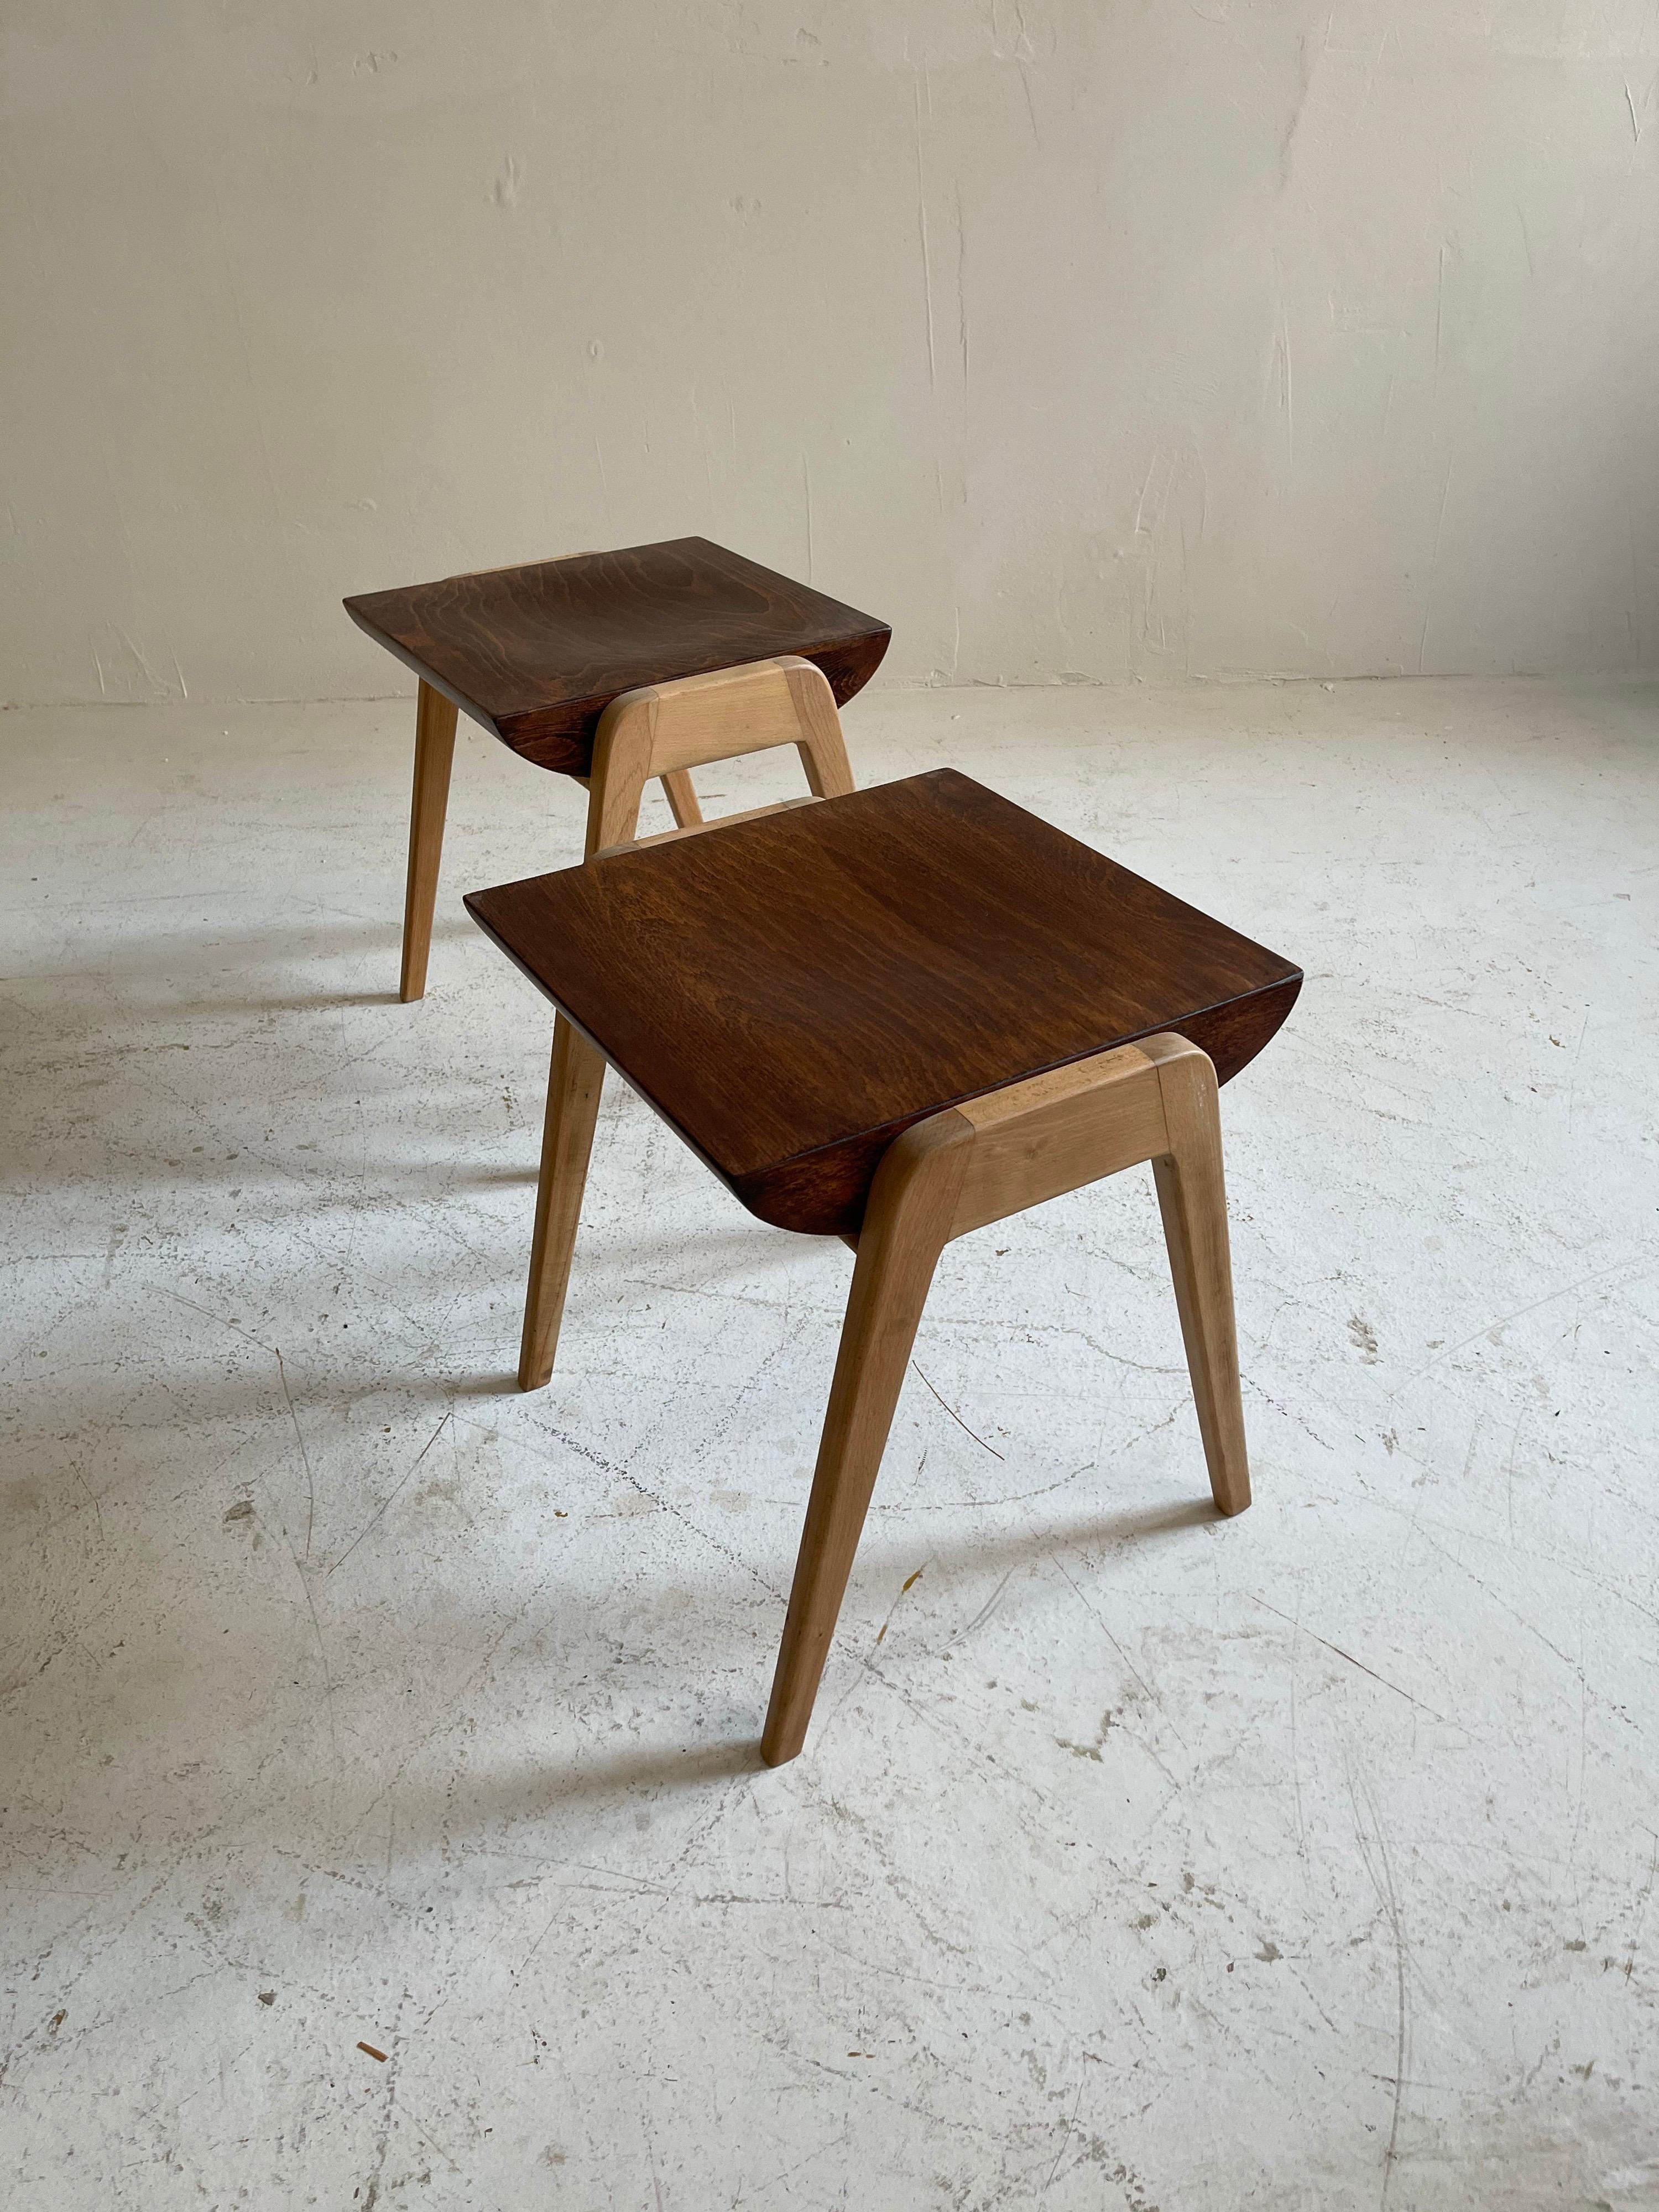 Franz Schuster Model 'Maestro' Dining Room Chairs & Stools, Austria, 1950s For Sale 9